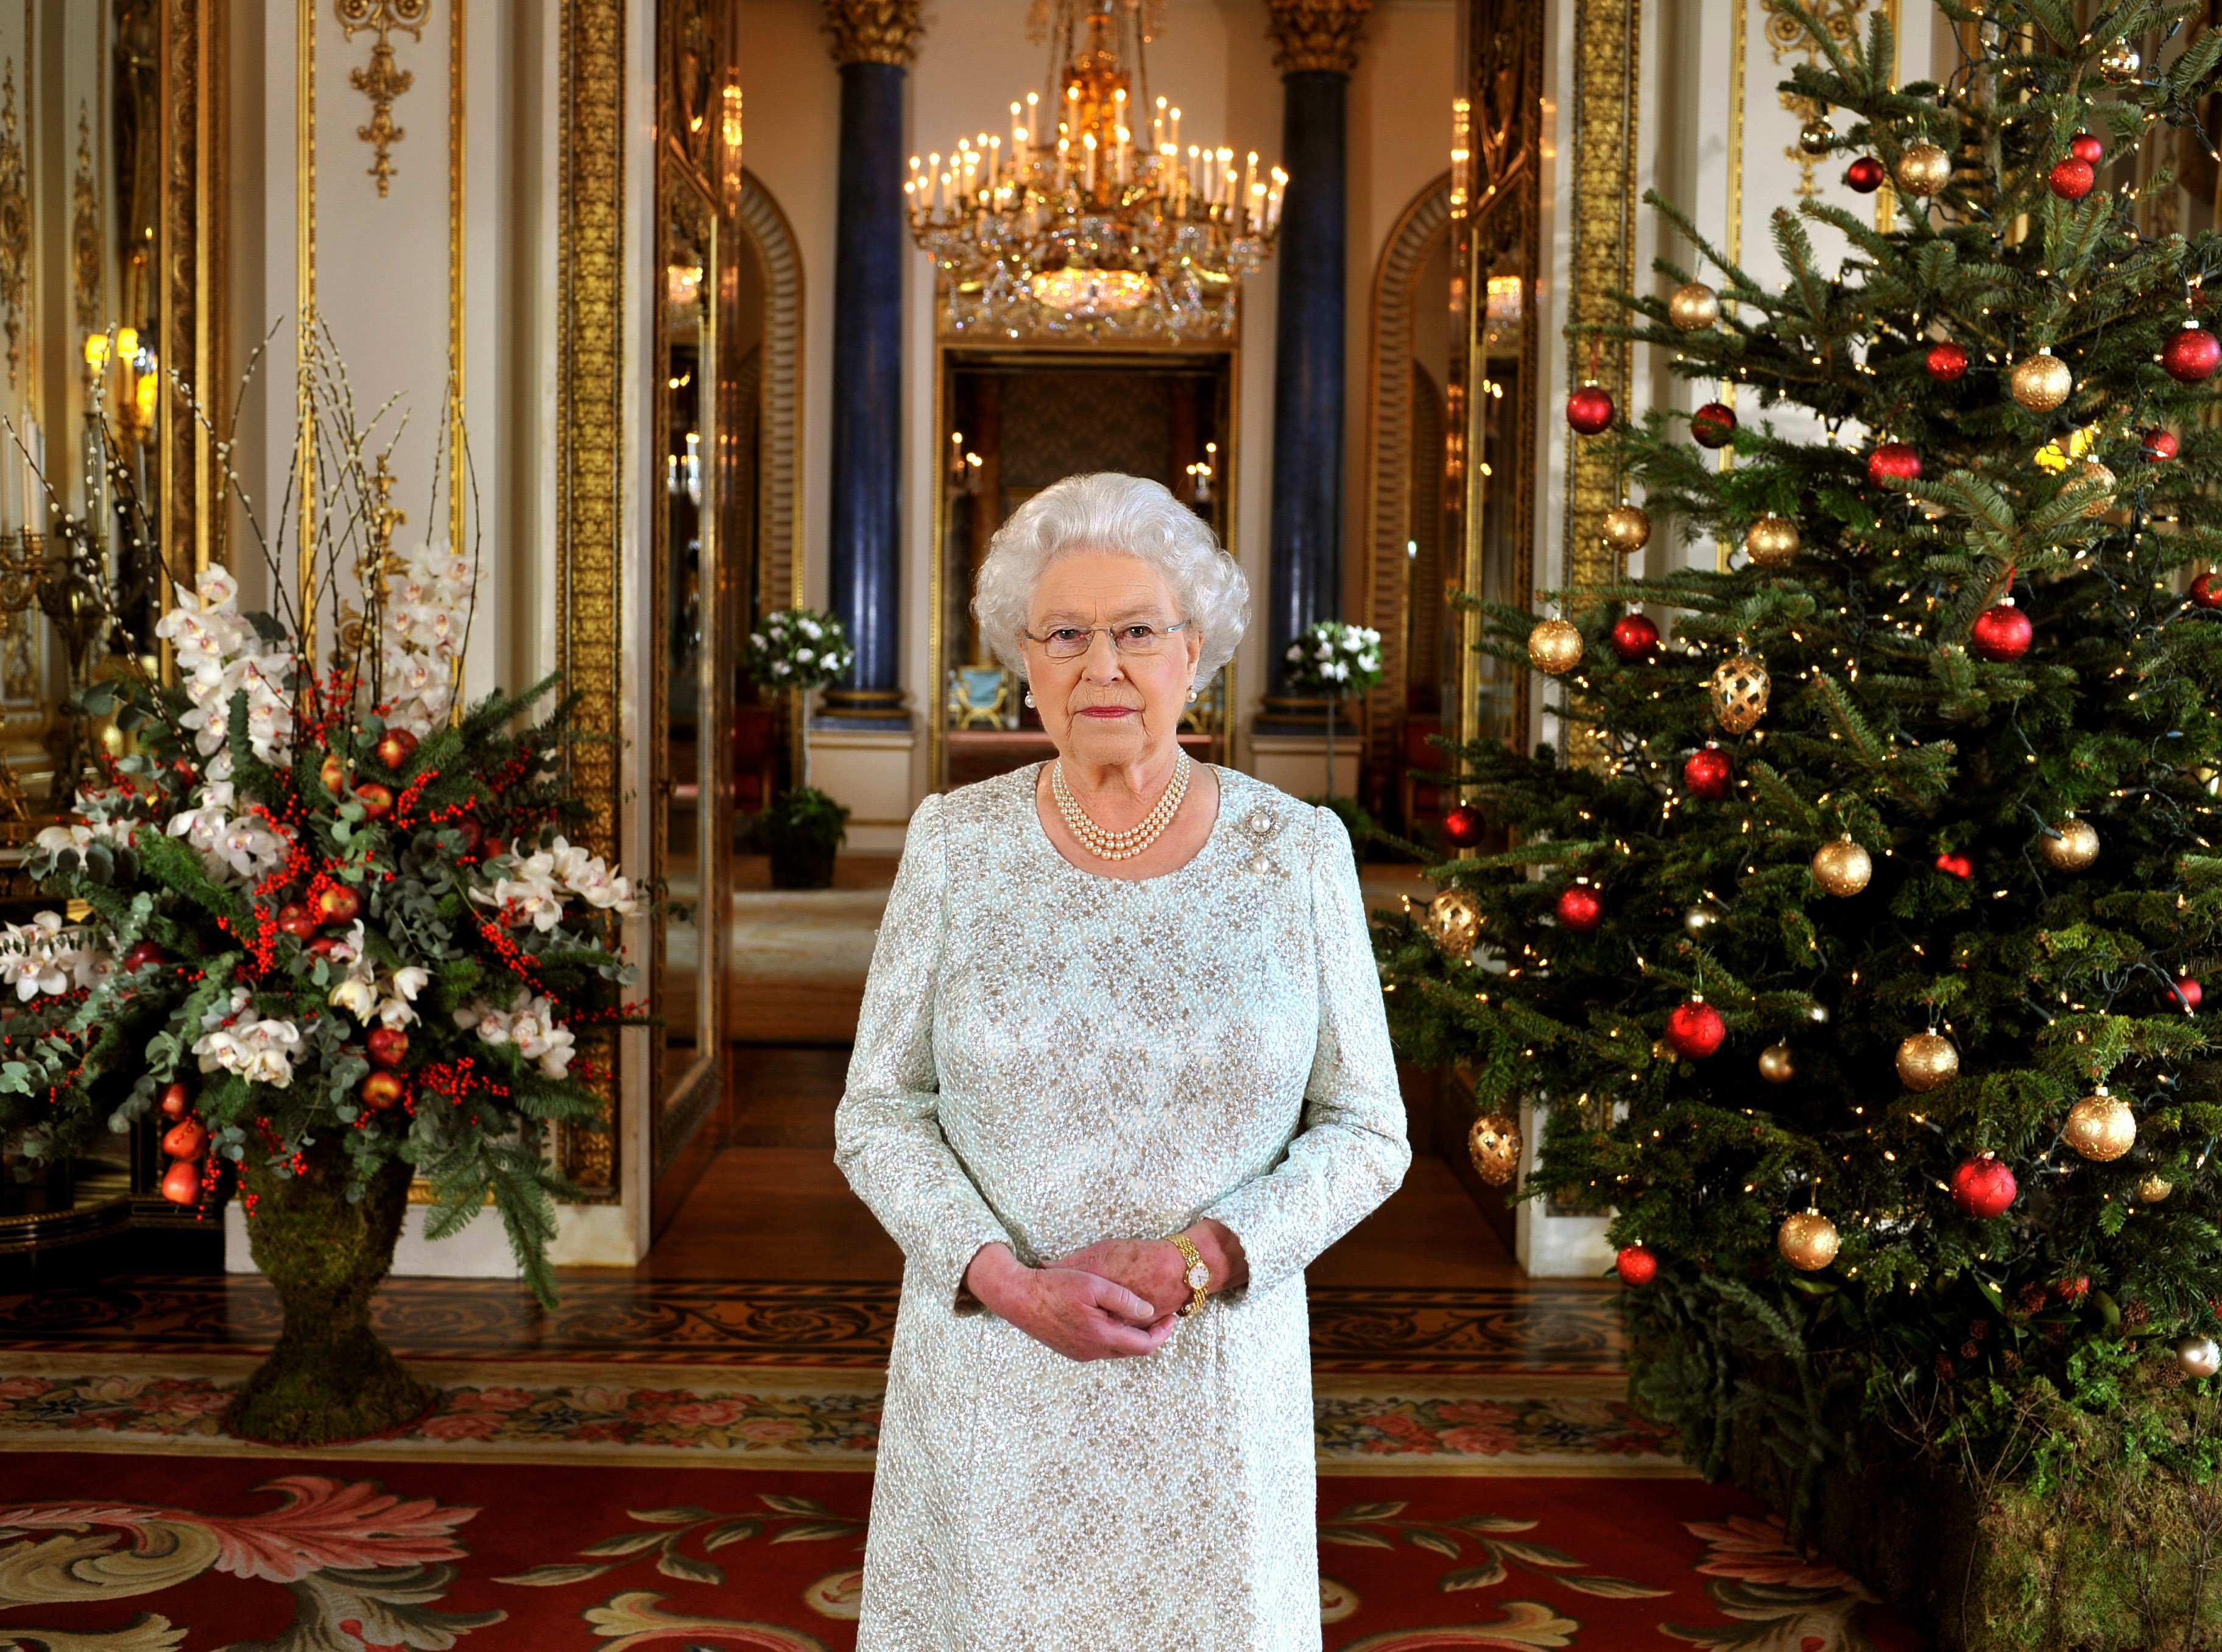  Queen Elizabeth II records her Christmas message to the Commonwealth, in 3D for the first time, in the White Drawing Room at Buckingham Palace on December 7, 2012, in London England. | Source: Getty Images.